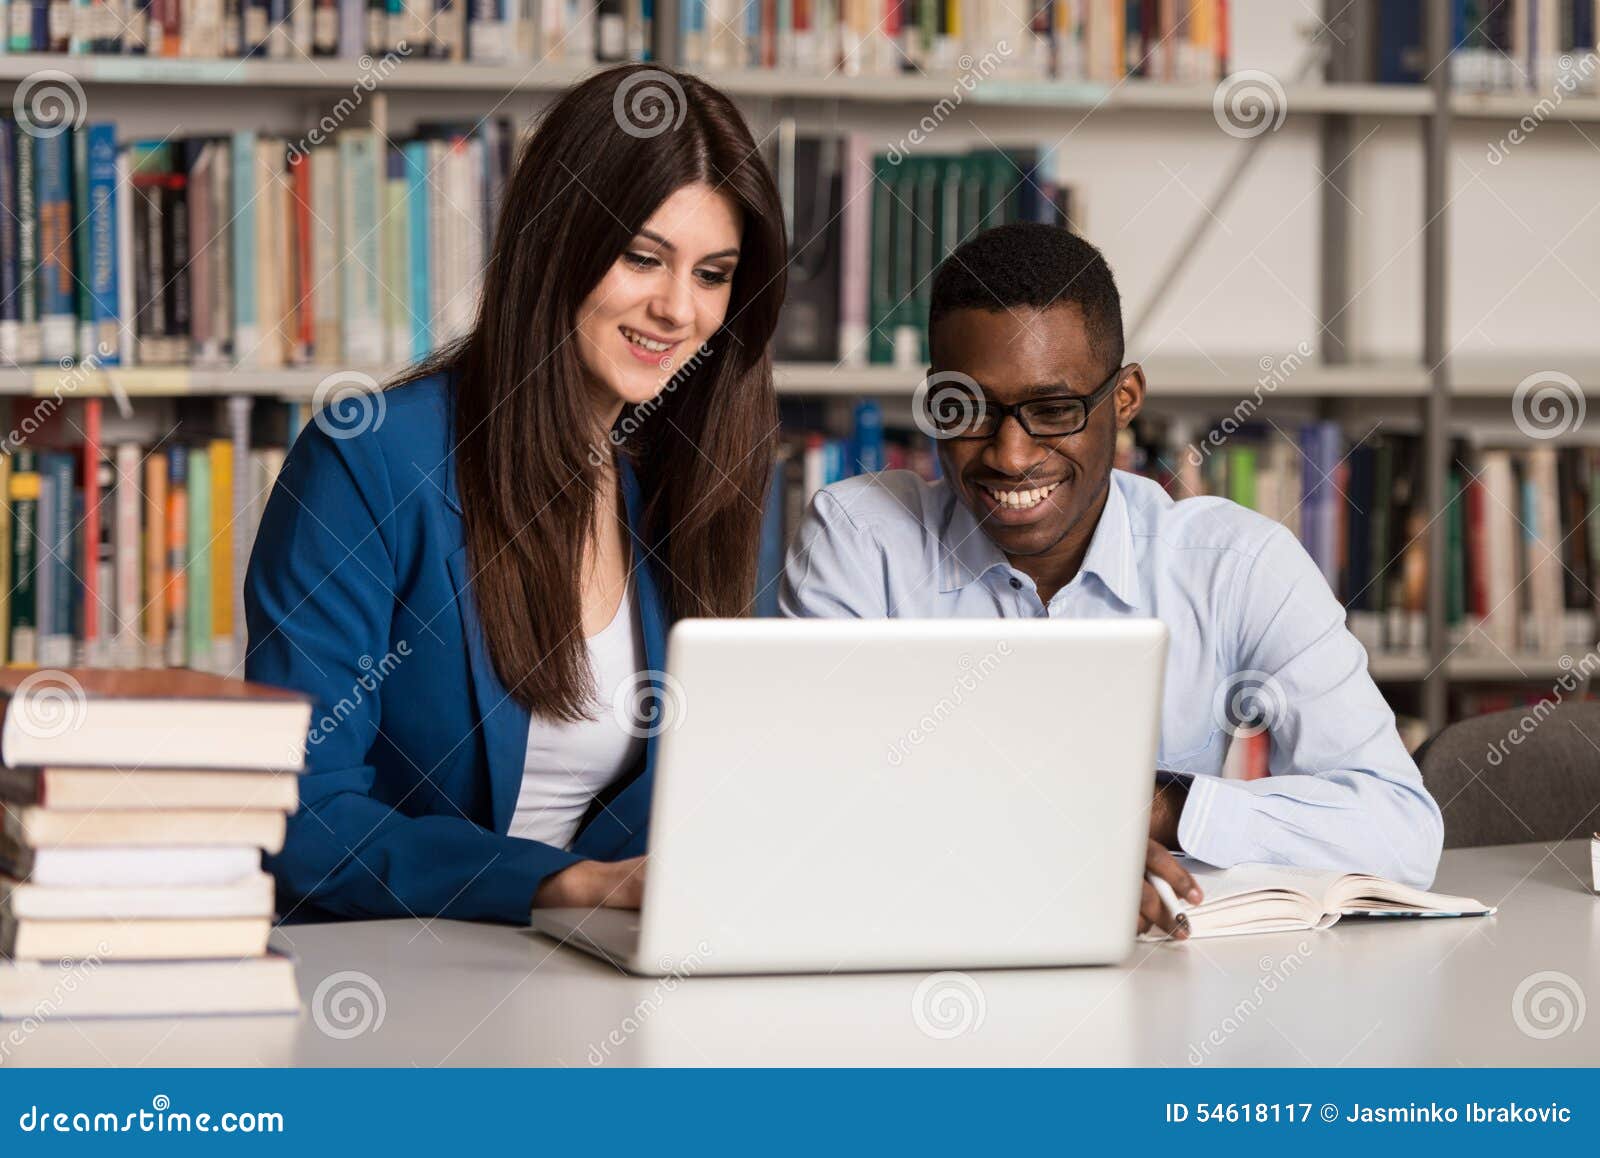 Couple Of Students With Laptop In Library Stock Image Image Of